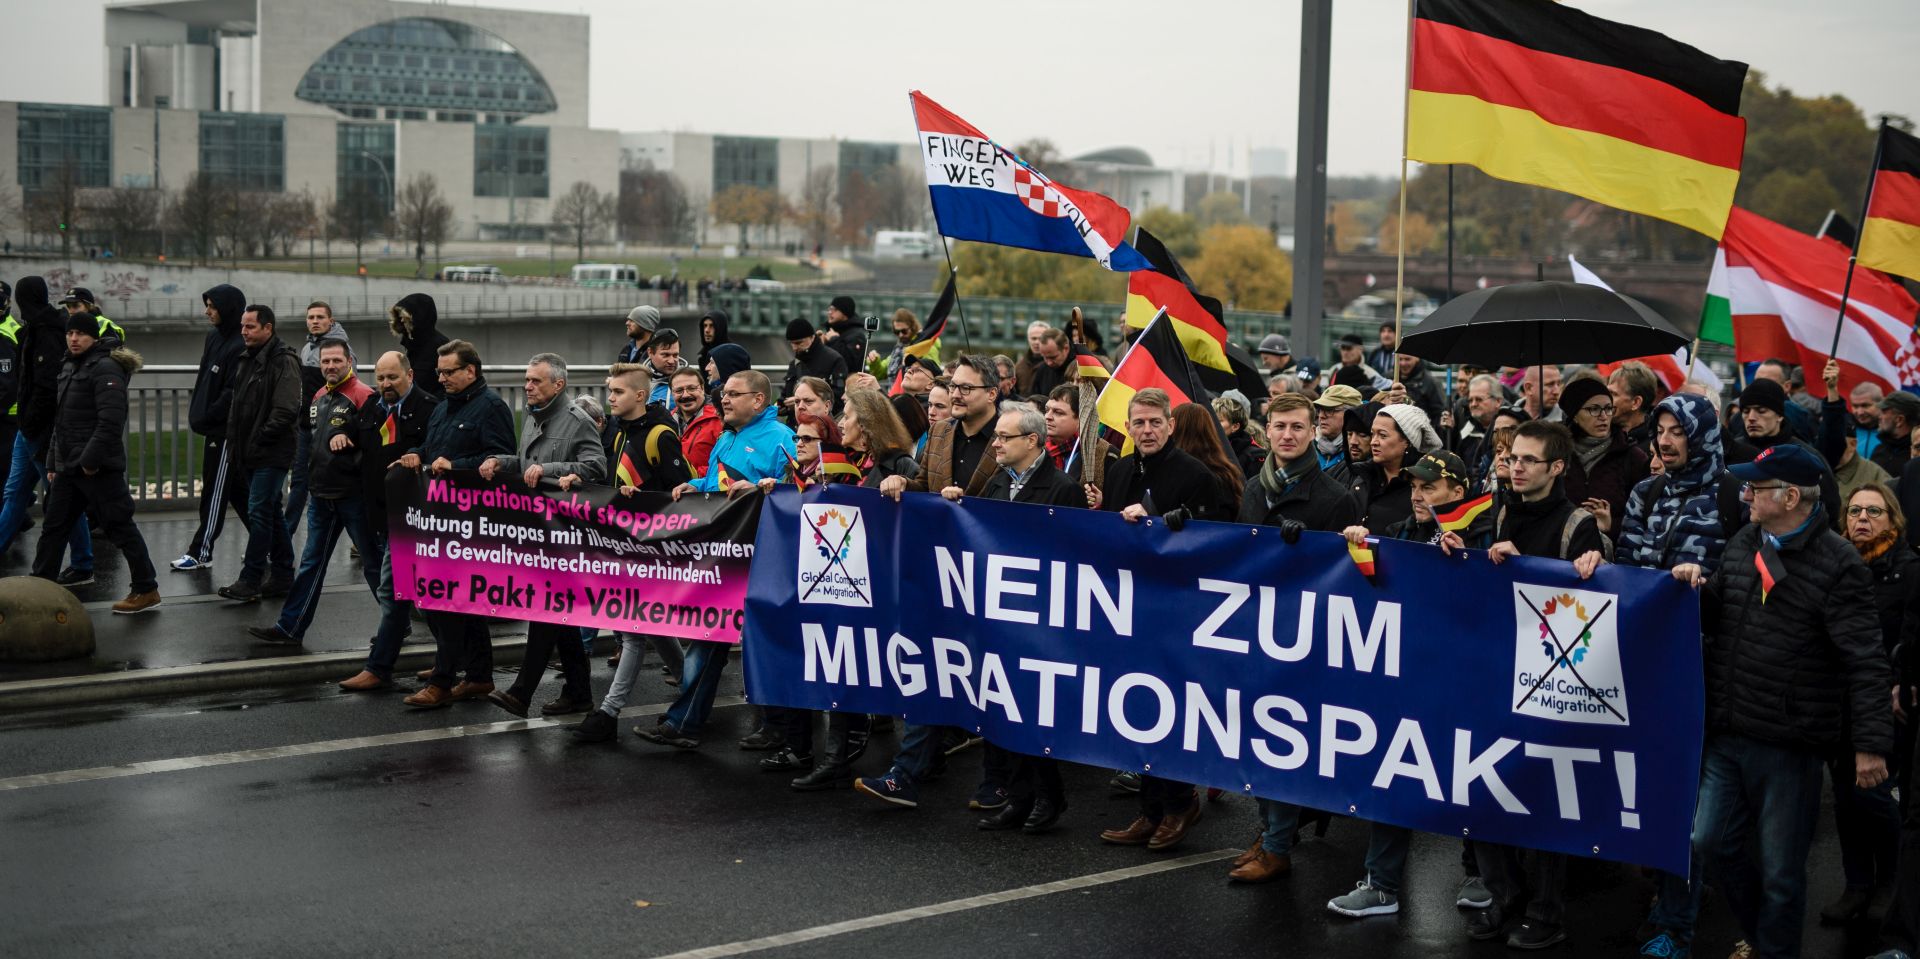 epa07157992 Protesters demonstrate against the so-calleed UN Migration Pact, in Berlin, Germany, 11 November 2018. Several Members of Parliament of the right-wing populist Alternative for Germany (Alternative fuer Deutschland, AfD) party called for a demonstration against the UN-proposed agreement. Already three days ago at the German 'Bundestag' parliament the AfD brought in a motion asking Germany to withdraw from the UN agreement. The Global Compact for Safe, Orderly and Regular Migration (GCM) is a non-binding 'intergovernmentally negotiated agreement, prepared under the auspices of the United Nations', meant to cover 'all dimensions of international migration in a holistic and comprehensive manner'. Some countries such as Austria, Australia, Croatia, Hungary and Poland already declared not to sign the agreement.  EPA/CLEMENS BILAN